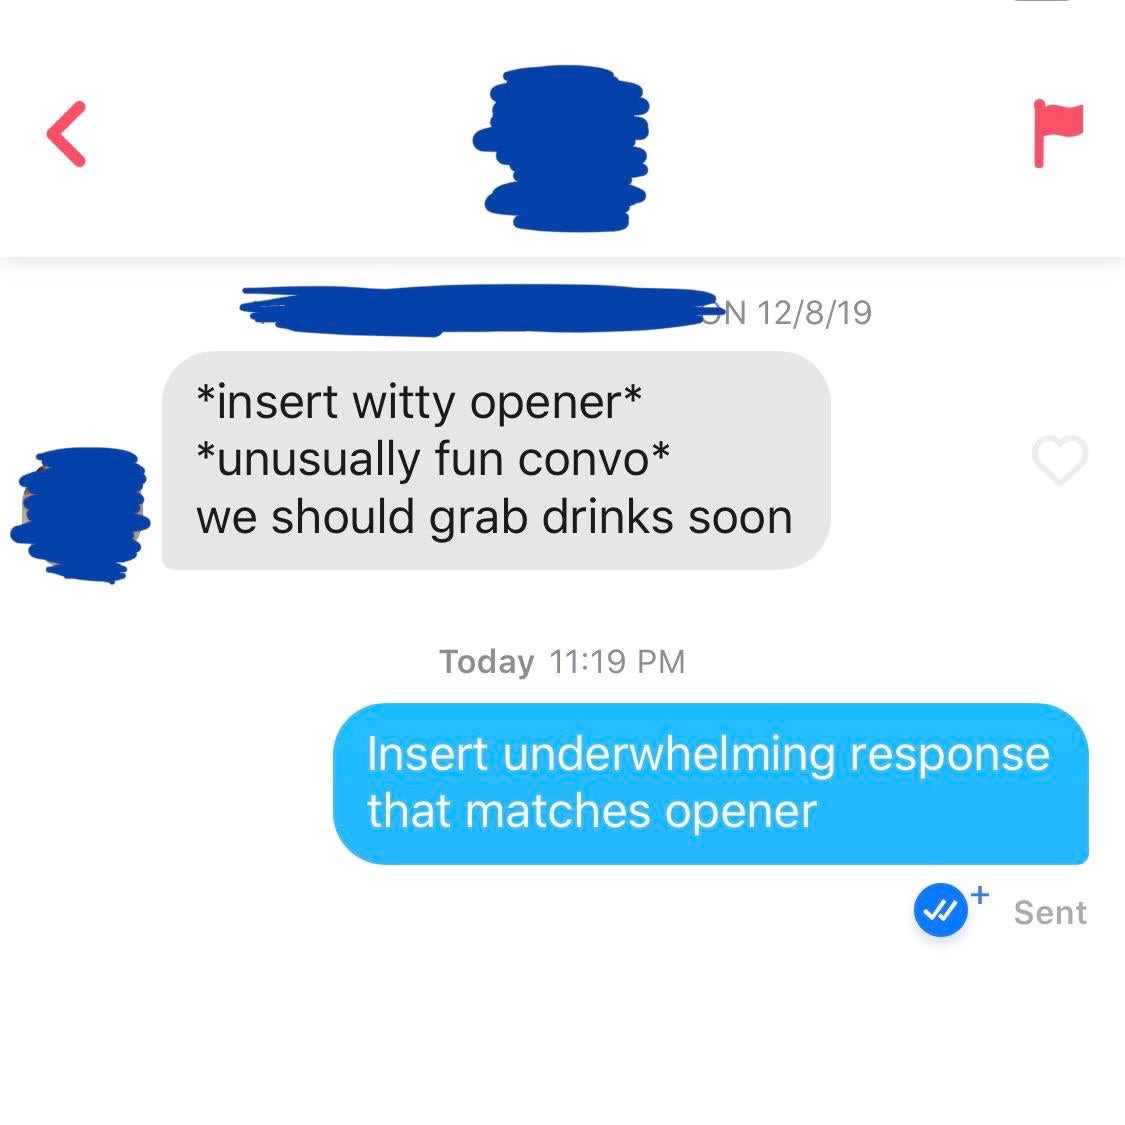 hilarious memes about work - En 12819 insert witty opener unusually fun convo we should grab drinks soon Today Insert underwhelming response that matches opener Sent